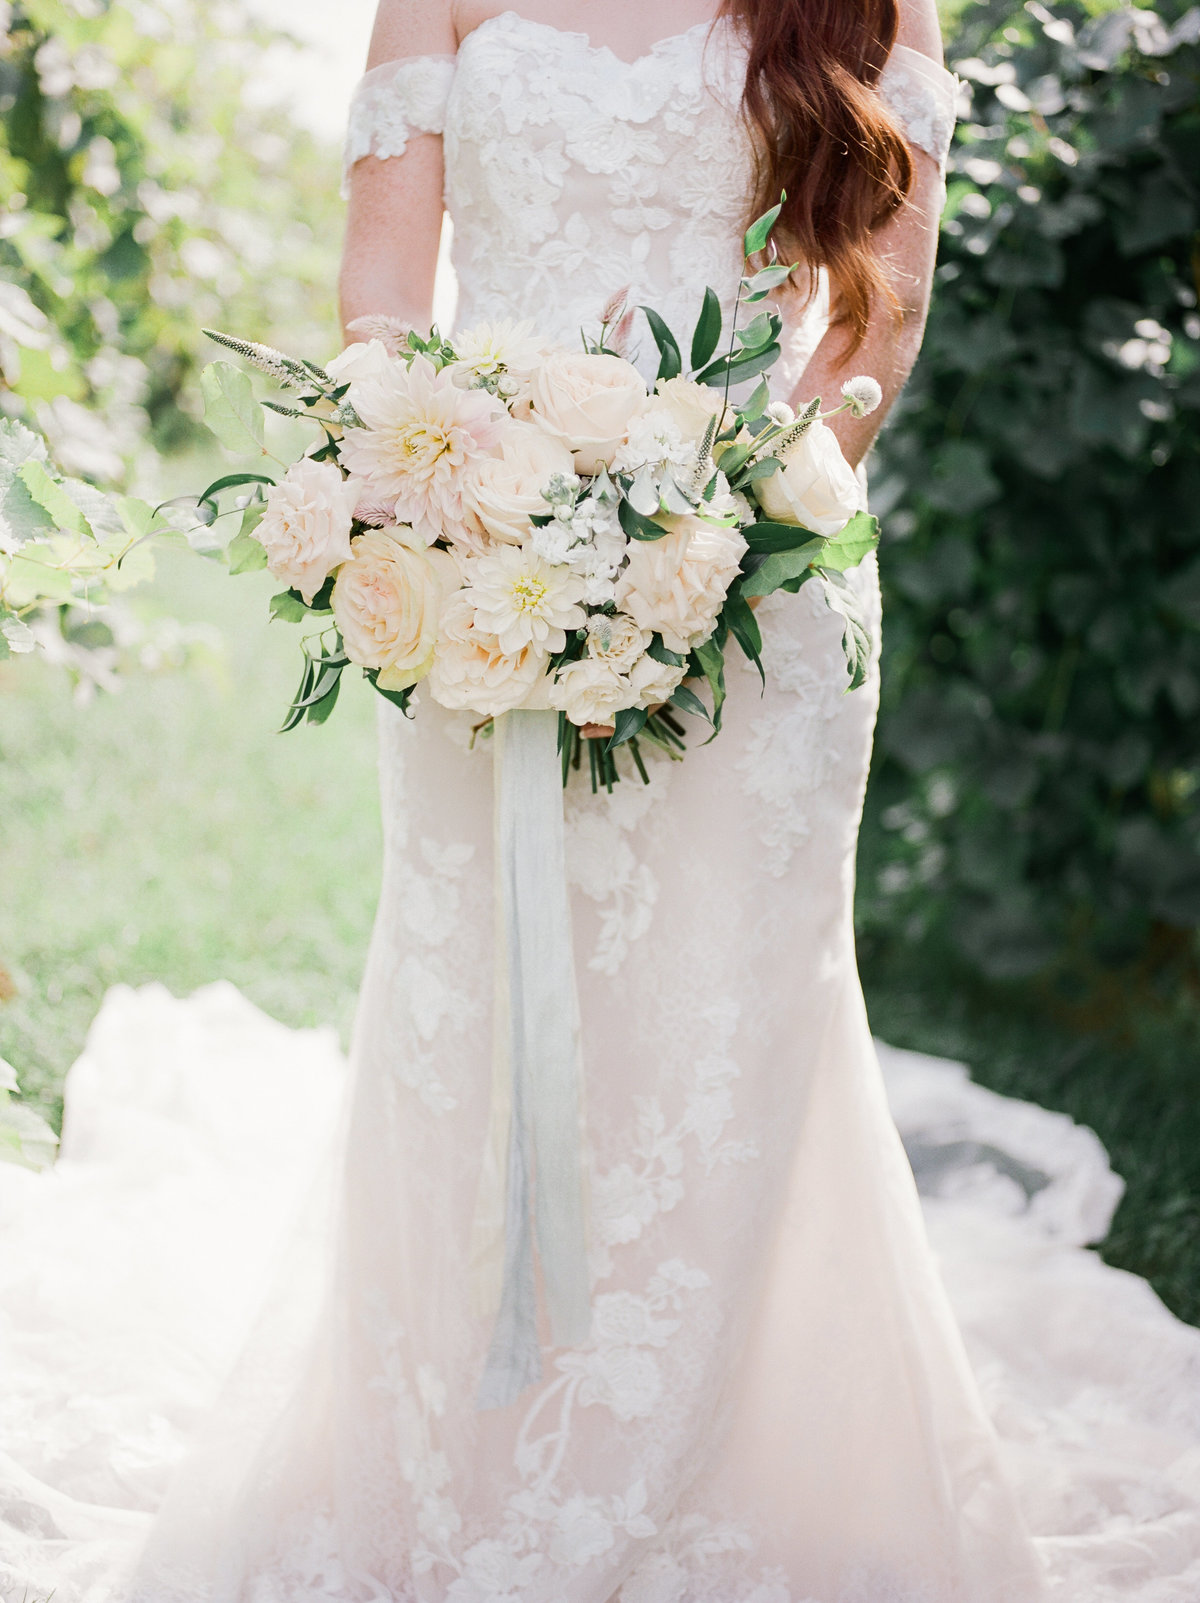 bride wearing strapless lace wedding gown holding white rose bouquet